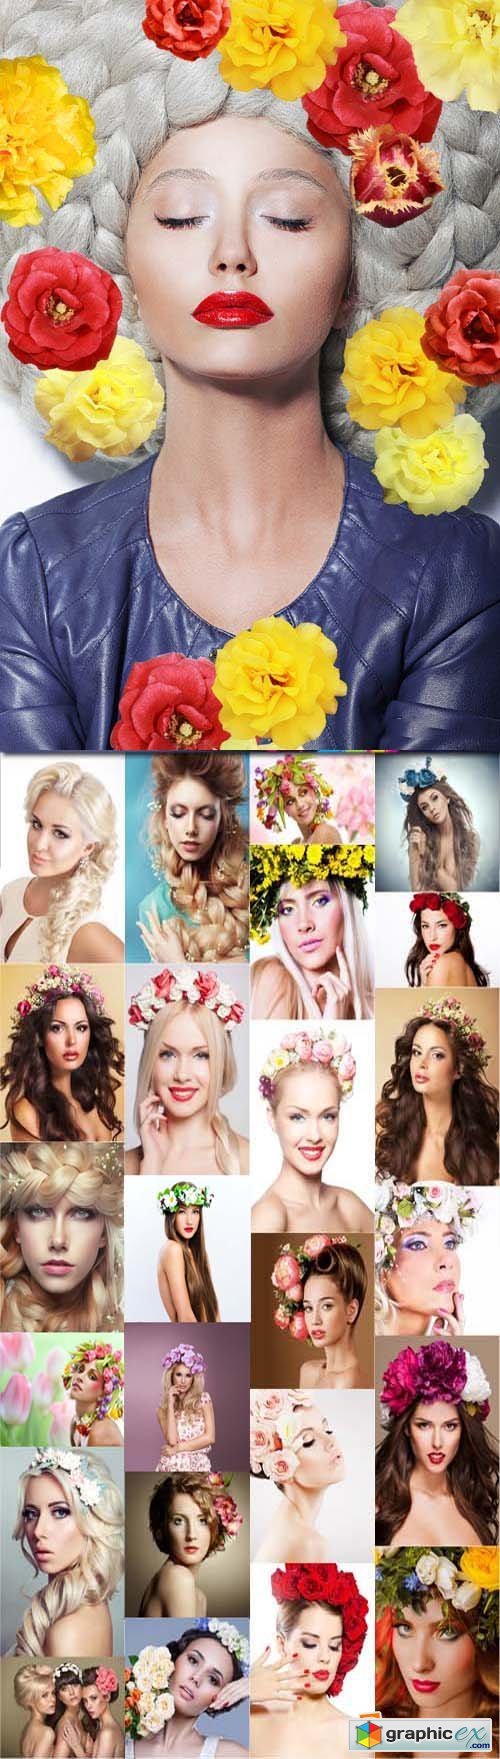 Beautiful women with wreath of flowers in hair, 25xJPGs